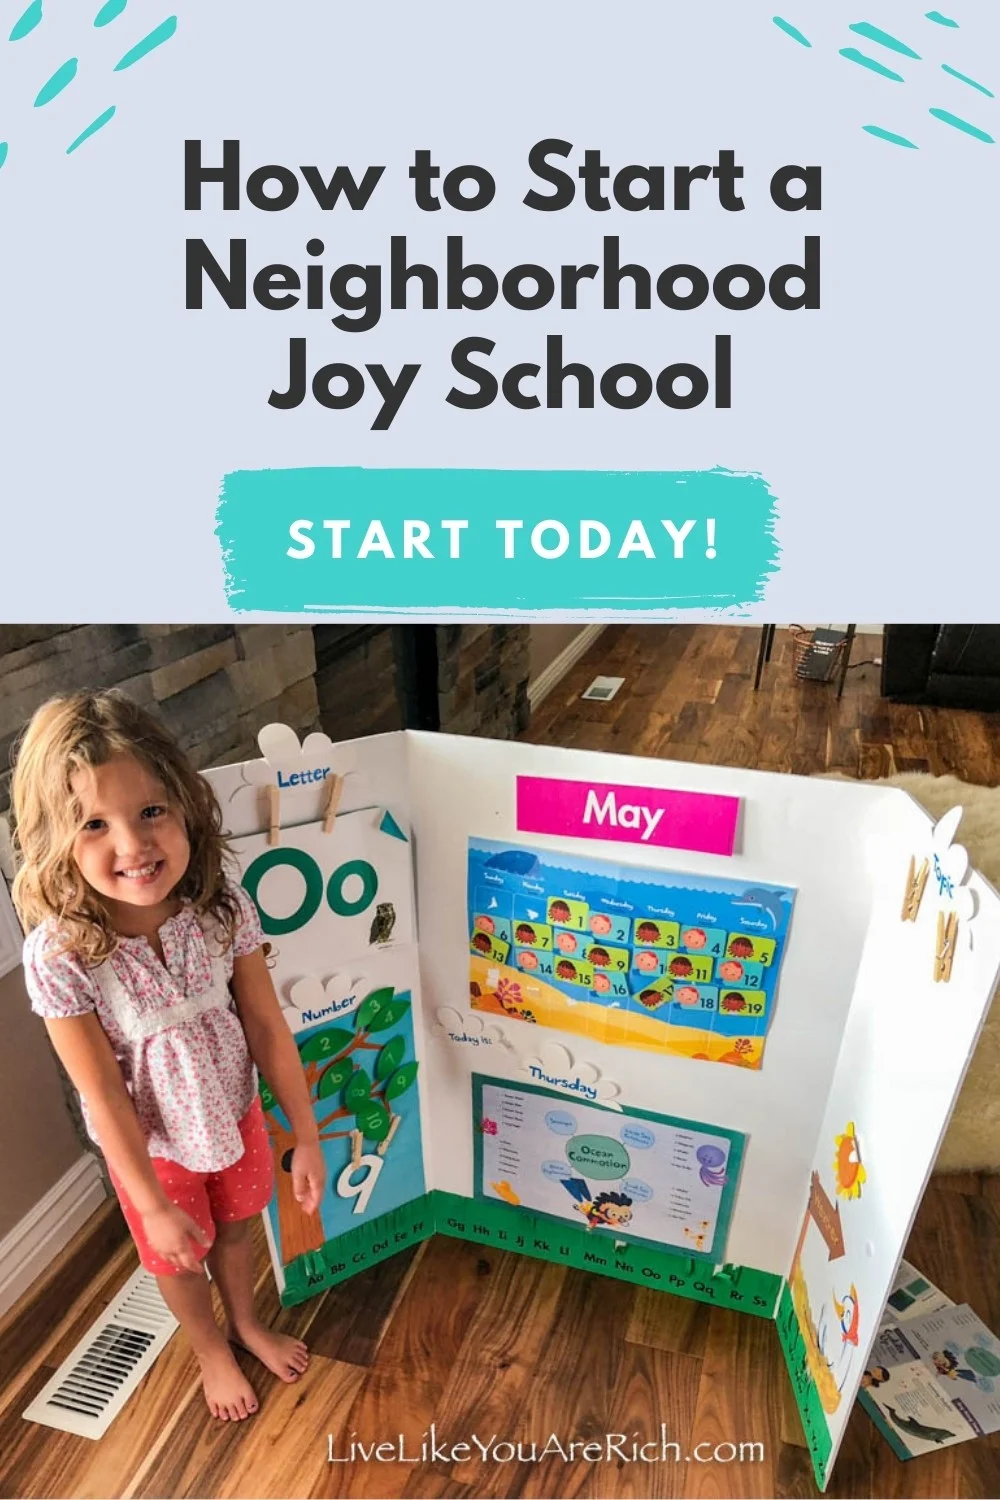 Joy school is also known as a co-op preschool; it is taught and ran by the mothers of the children. Participating in a neighborhood joy school was such a positive experience! I’d highly recommend participating in one if you can! I’m sharing these 13 steps to help you know how to start a neighborhood joy school!